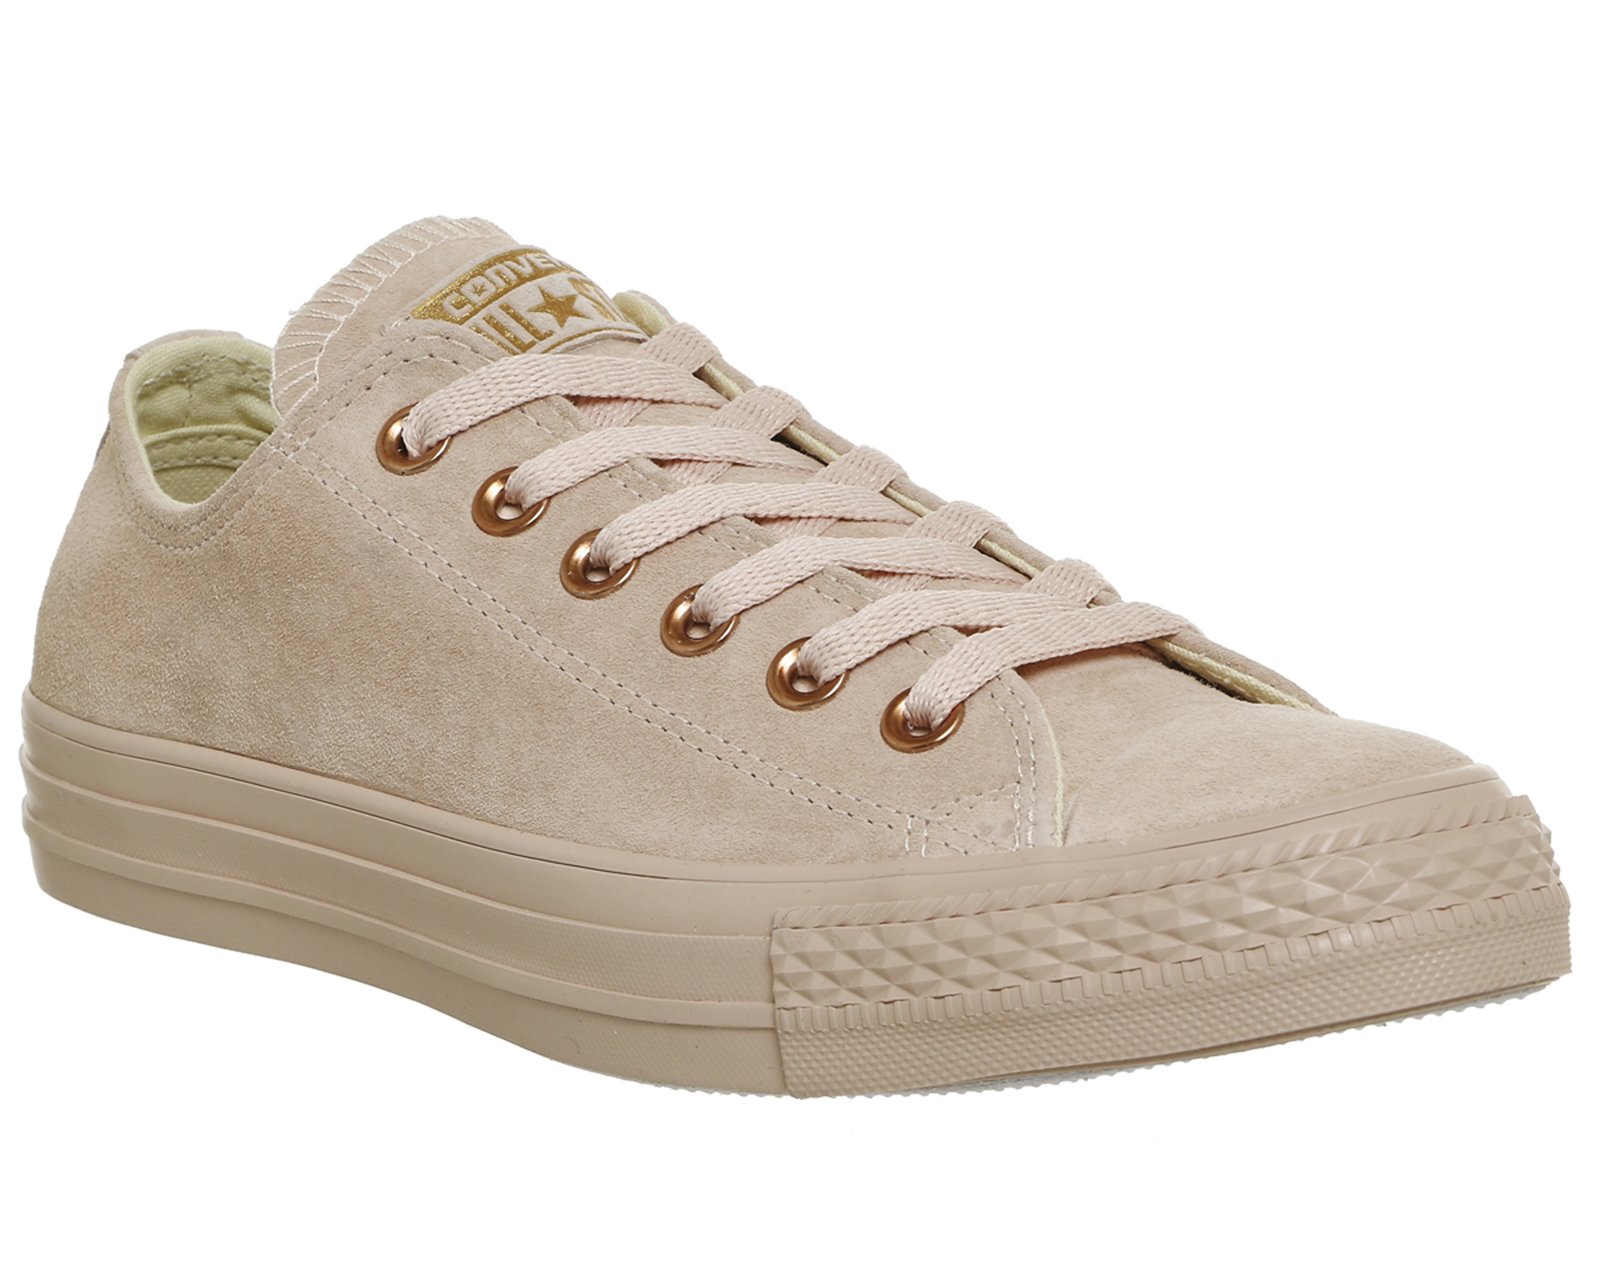 Converse All Star Low Leather Trainers Bisque Rose Gold Exclusive - Hers  trainers